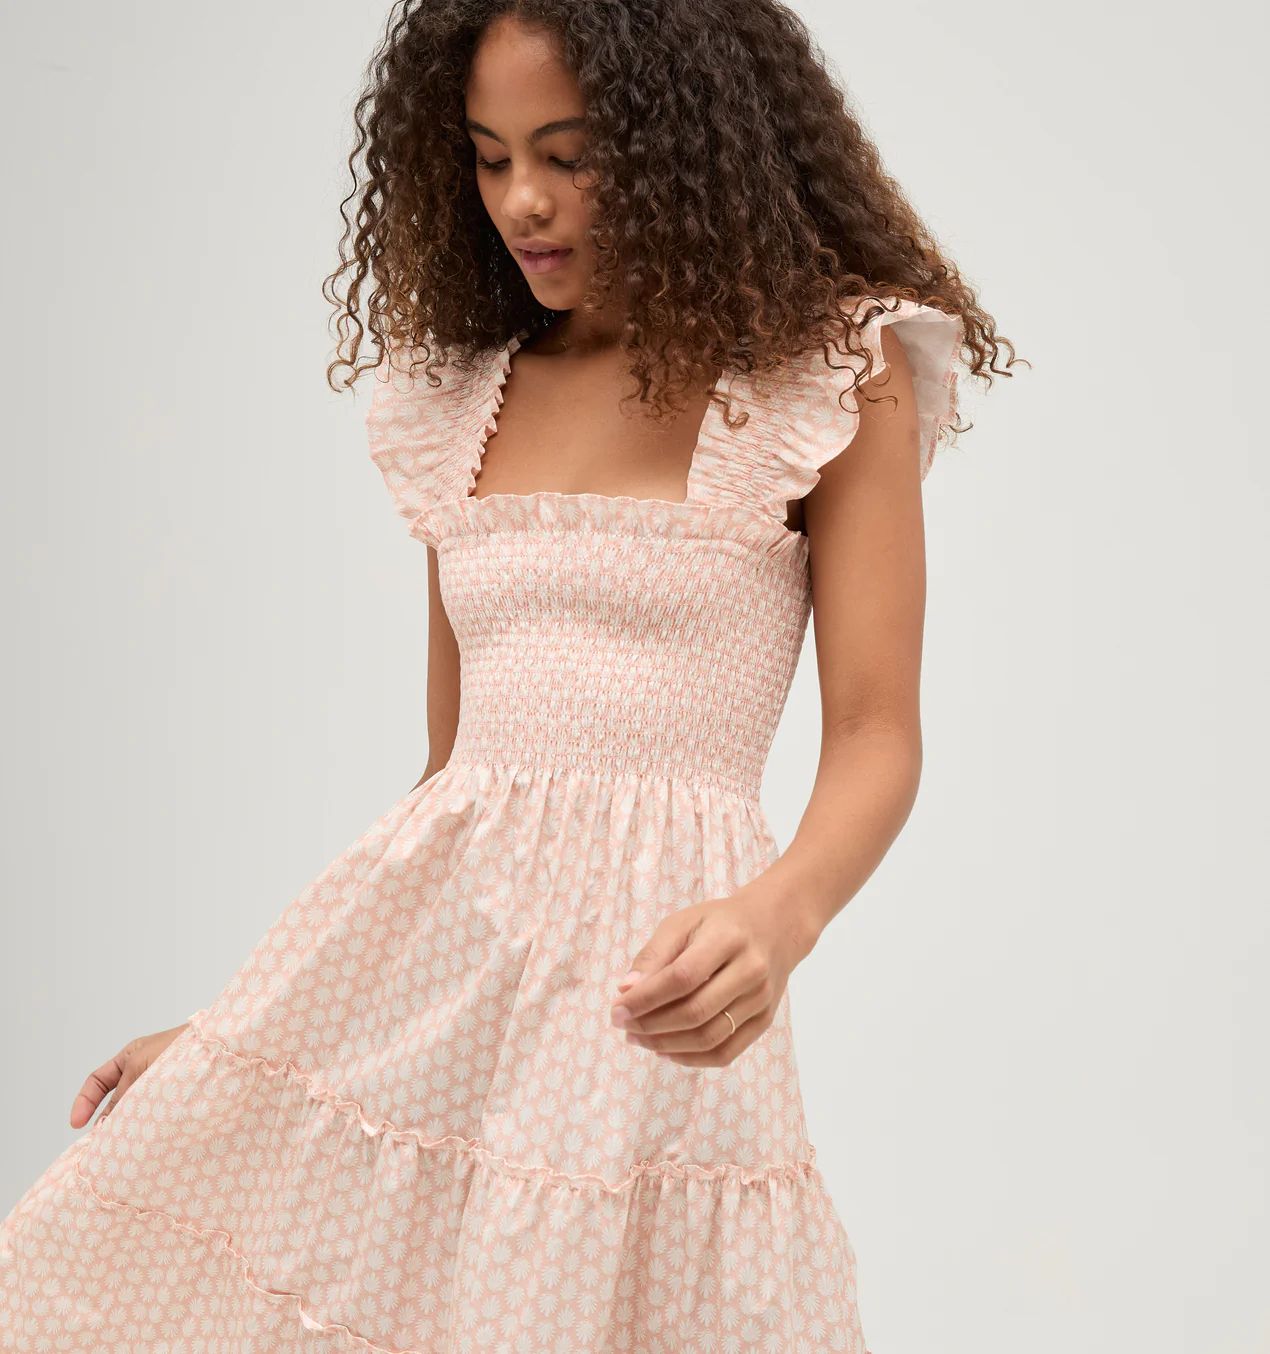 The Ellie Nap Dress - Coral Baroque Shell Cotton Sateen | Hill House Home